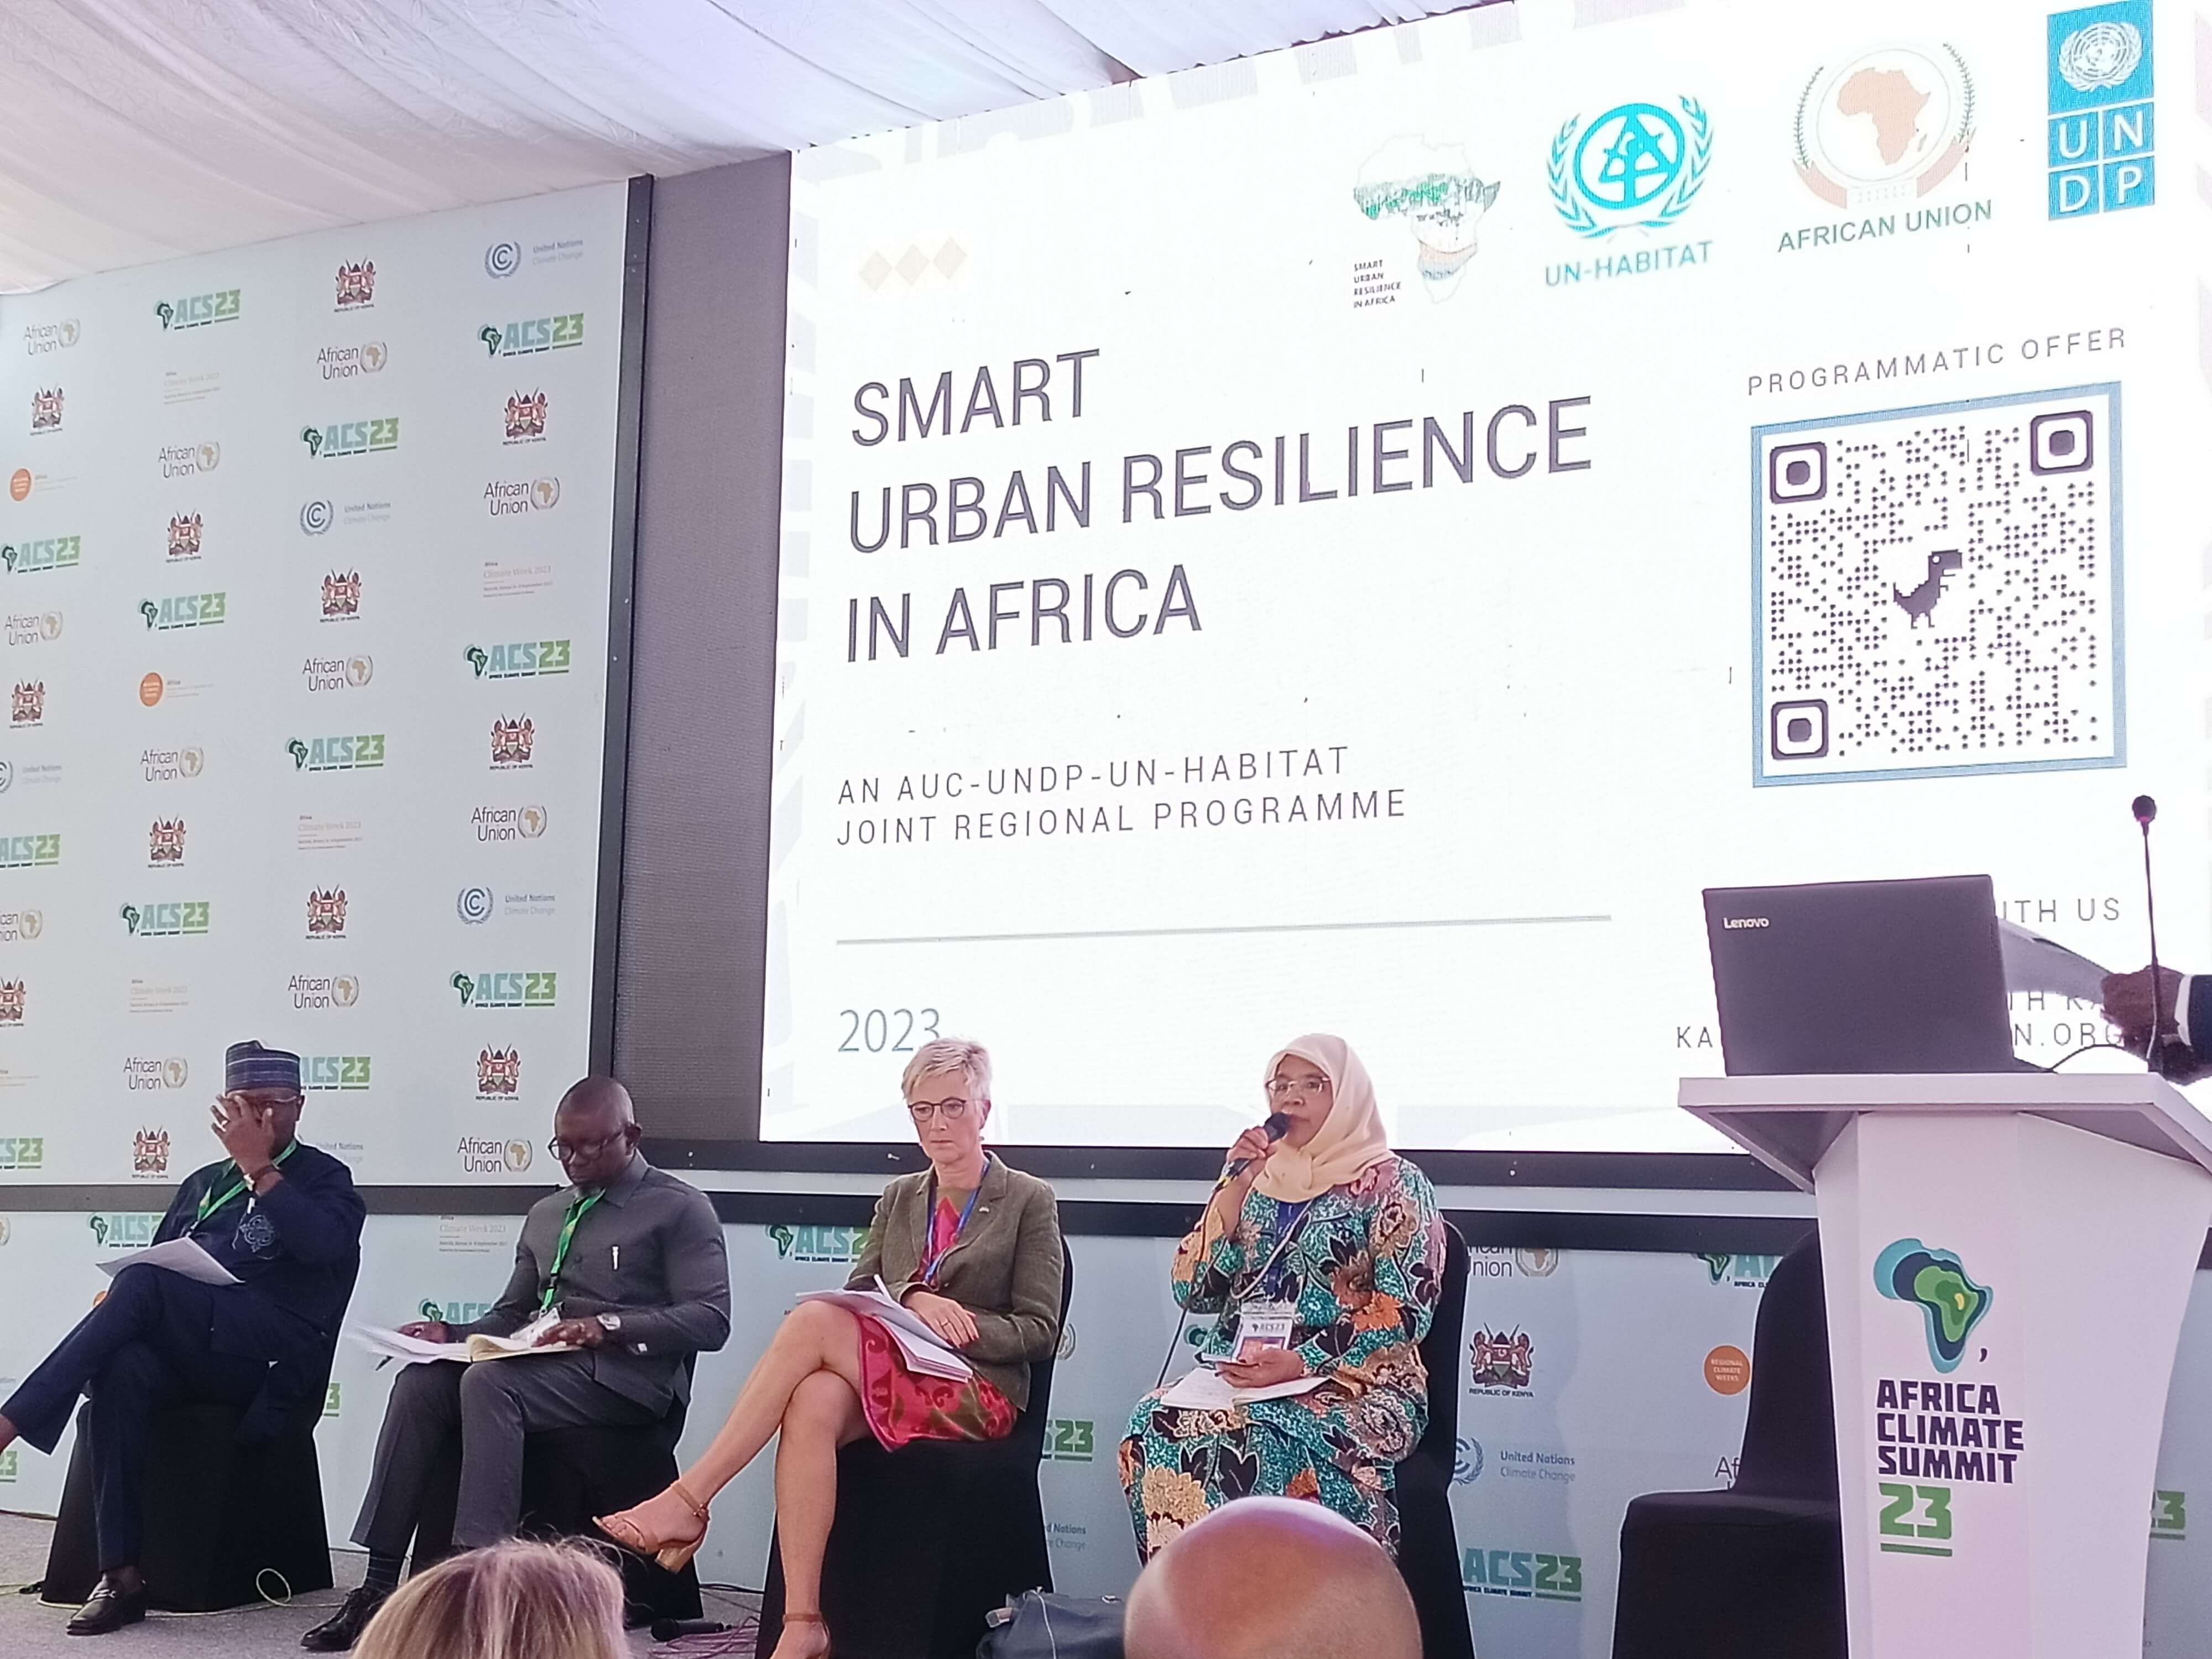 Executive Director Maimunah Mohd Sharif engages actively with United Nations Development Programme (UNDP) and African Union Commission (AUC) representatives during the ACS, driving initiatives to strengthen urban resilience in Africa.